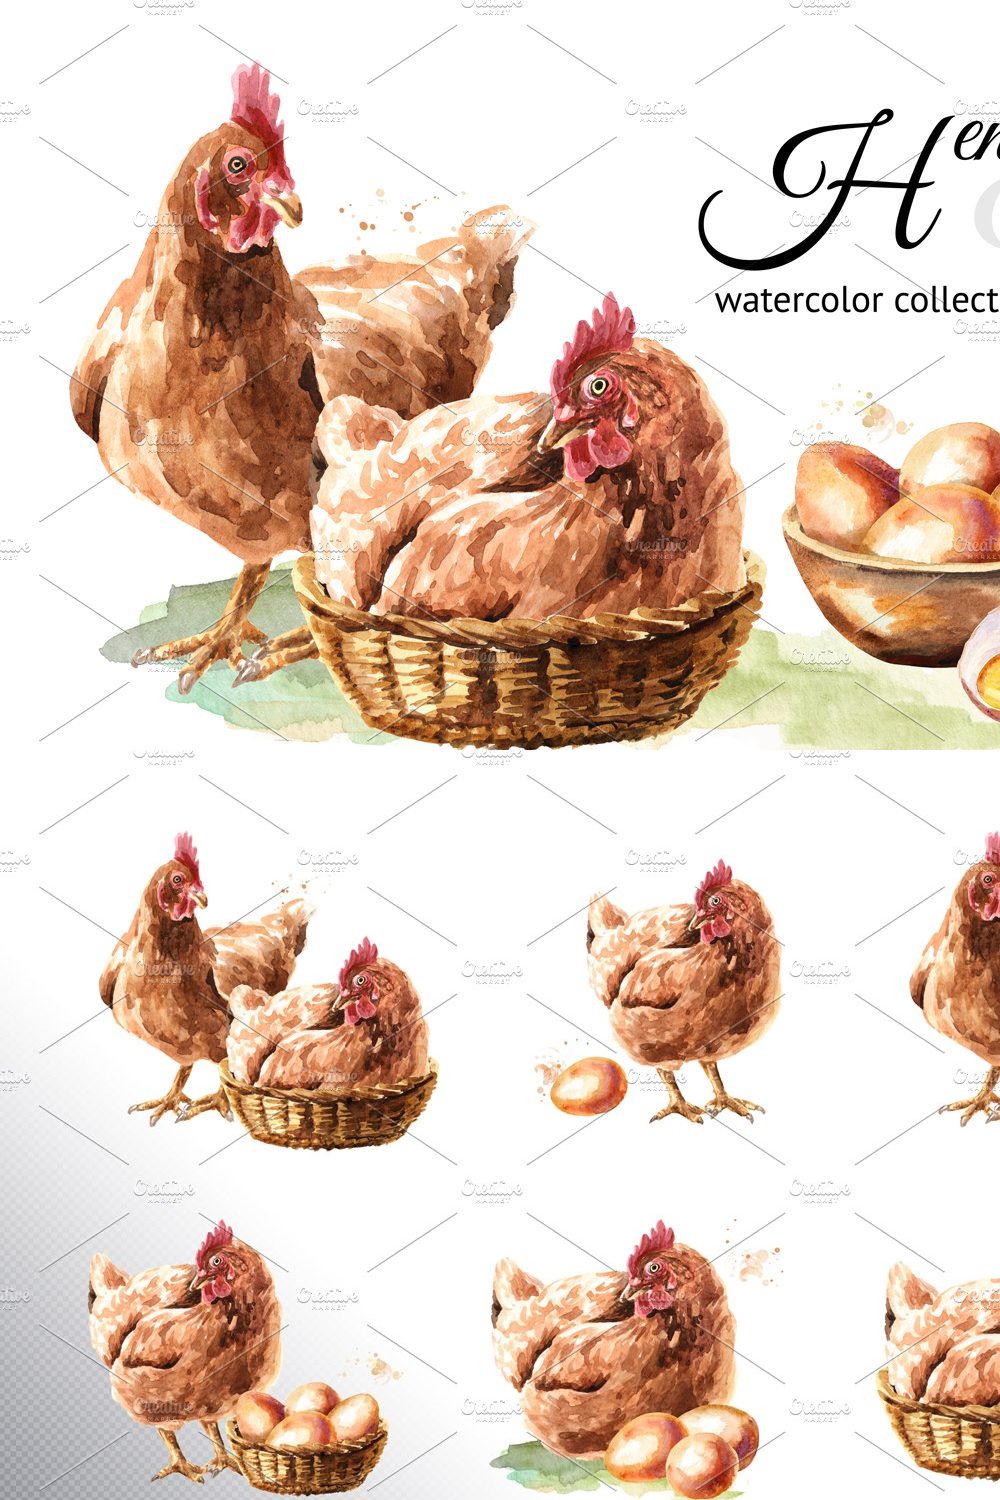 Hens & eggs. Watercolor collection pinterest preview image.